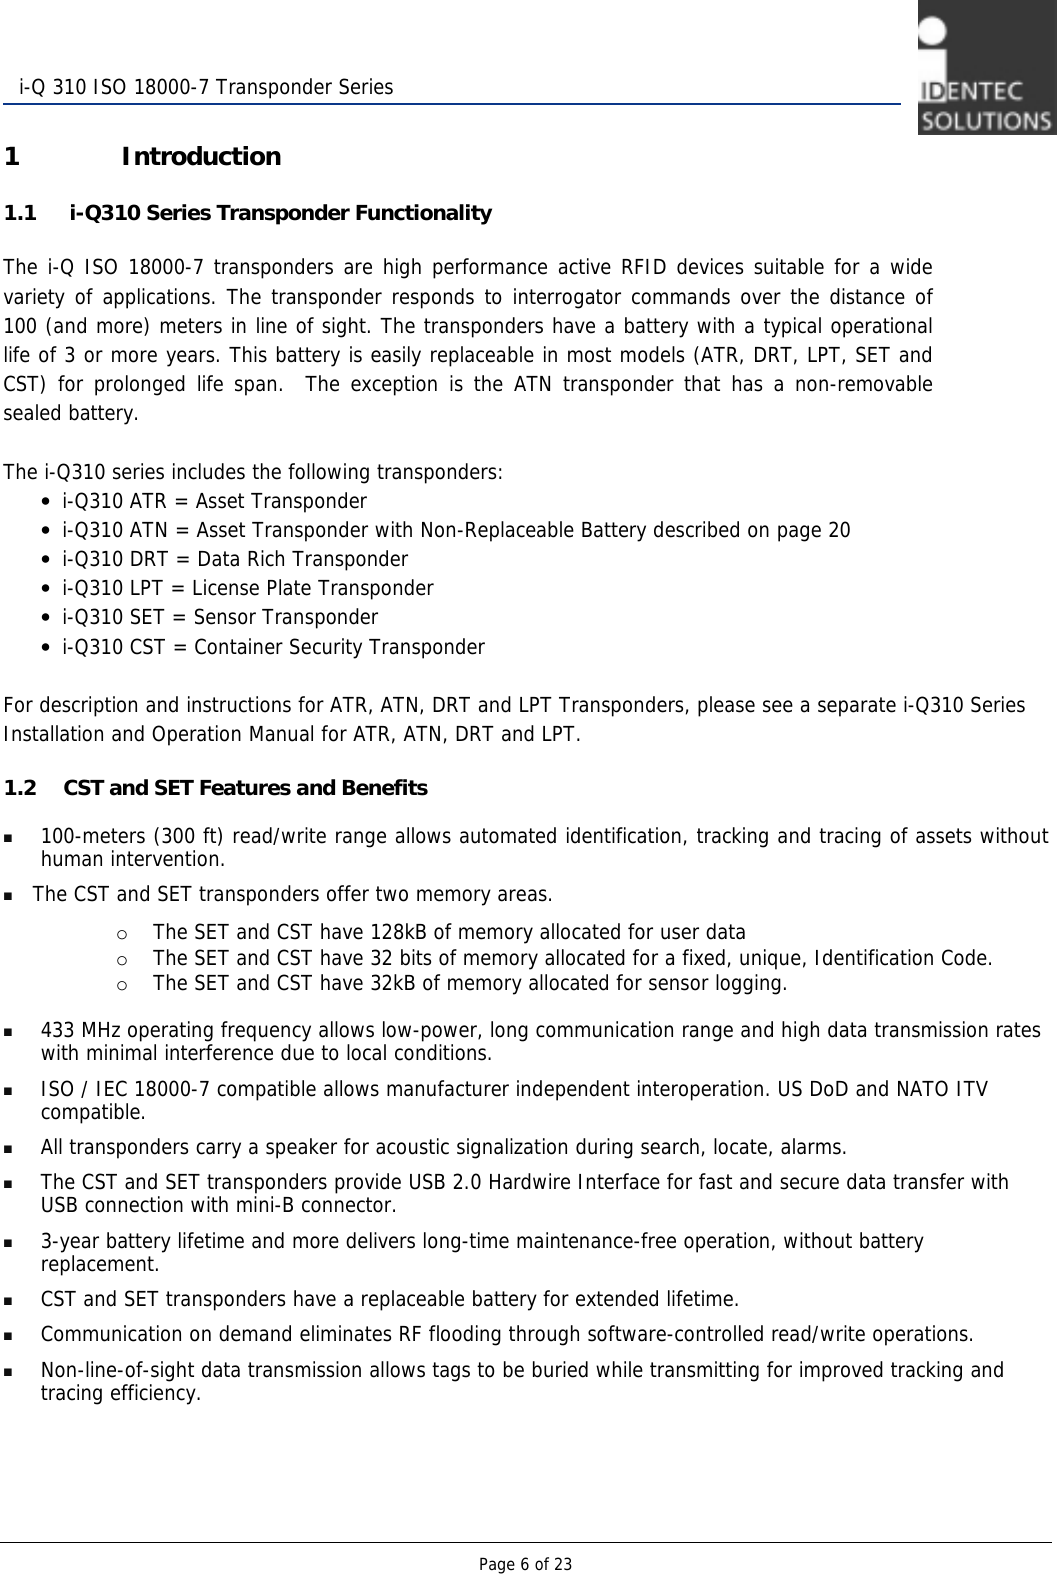   Page 6 of 23  i-Q 310 ISO 18000-7 Transponder Series 1 Introduction 1.1  i-Q310 Series Transponder Functionality The i-Q ISO 18000-7 transponders are high performance active RFID devices suitable for a wide variety of applications. The transponder responds to interrogator commands over the distance of 100 (and more) meters in line of sight. The transponders have a battery with a typical operational life of 3 or more years. This battery is easily replaceable in most models (ATR, DRT, LPT, SET and CST) for prolonged life span.  The exception is the ATN transponder that has a non-removable sealed battery.    The i-Q310 series includes the following transponders: • i-Q310 ATR = Asset Transponder  • i-Q310 ATN = Asset Transponder with Non-Replaceable Battery described on page 20 • i-Q310 DRT = Data Rich Transponder • i-Q310 LPT = License Plate Transponder • i-Q310 SET = Sensor Transponder  • i-Q310 CST = Container Security Transponder  For description and instructions for ATR, ATN, DRT and LPT Transponders, please see a separate i-Q310 Series Installation and Operation Manual for ATR, ATN, DRT and LPT. 1.2 CST and SET Features and Benefits  100-meters (300 ft) read/write range allows automated identification, tracking and tracing of assets without human intervention.  The CST and SET transponders offer two memory areas.   o The SET and CST have 128kB of memory allocated for user data o The SET and CST have 32 bits of memory allocated for a fixed, unique, Identification Code.  o The SET and CST have 32kB of memory allocated for sensor logging.   433 MHz operating frequency allows low-power, long communication range and high data transmission rates with minimal interference due to local conditions.  ISO / IEC 18000-7 compatible allows manufacturer independent interoperation. US DoD and NATO ITV compatible.    All transponders carry a speaker for acoustic signalization during search, locate, alarms.  The CST and SET transponders provide USB 2.0 Hardwire Interface for fast and secure data transfer with USB connection with mini-B connector.  3-year battery lifetime and more delivers long-time maintenance-free operation, without battery replacement.  CST and SET transponders have a replaceable battery for extended lifetime.  Communication on demand eliminates RF flooding through software-controlled read/write operations.  Non-line-of-sight data transmission allows tags to be buried while transmitting for improved tracking and tracing efficiency.   